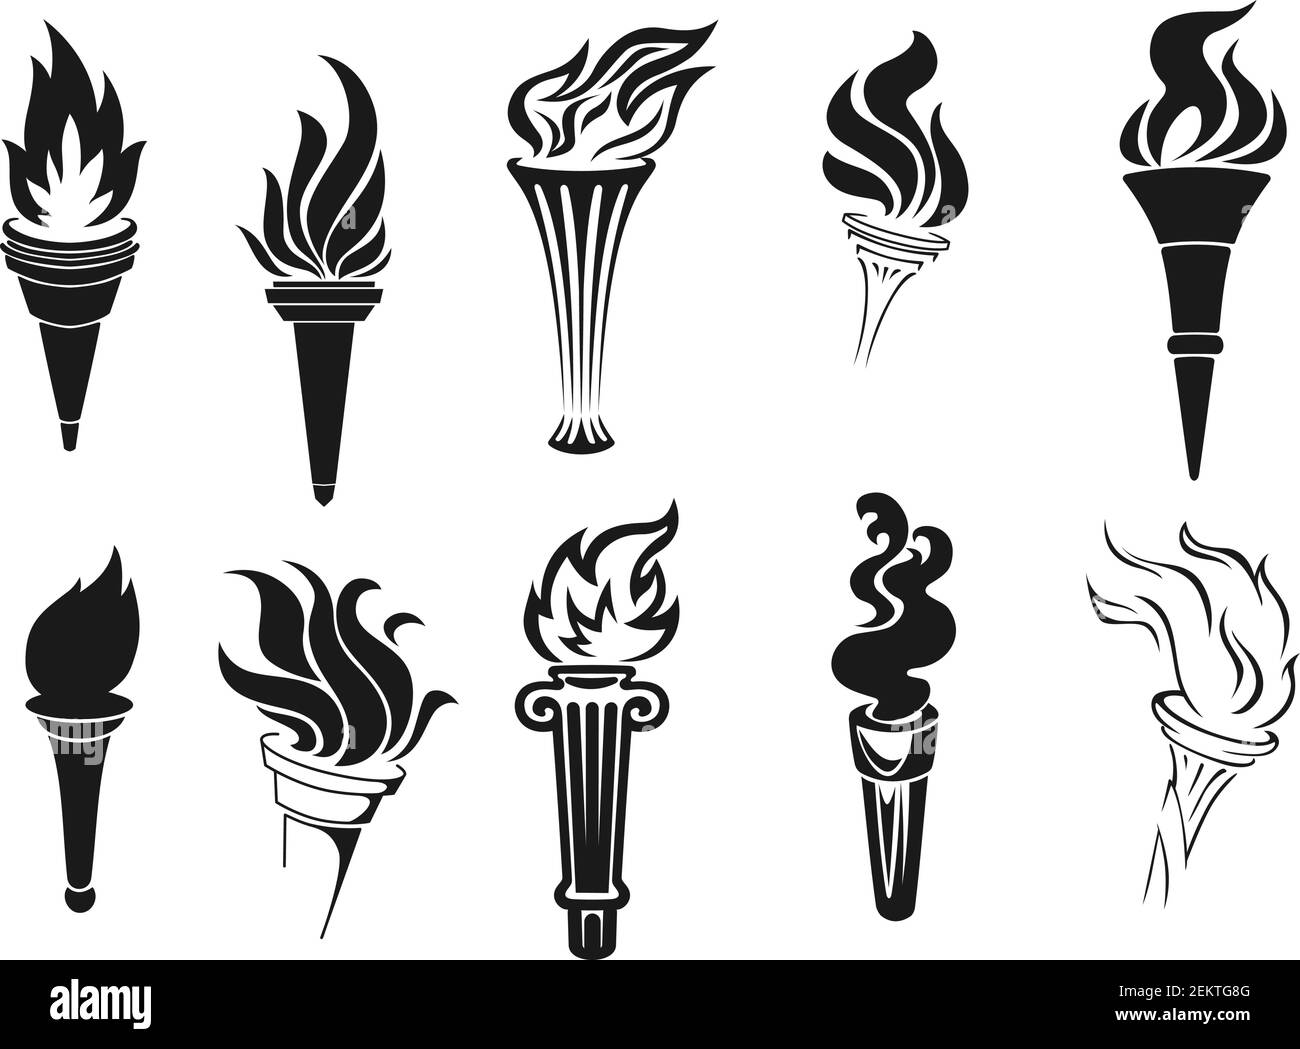 Fire torch vector icons. Vector burning flames, symbols of competition, marathons and rally races, signs of sportive game championship. Monochrome tor Stock Vector